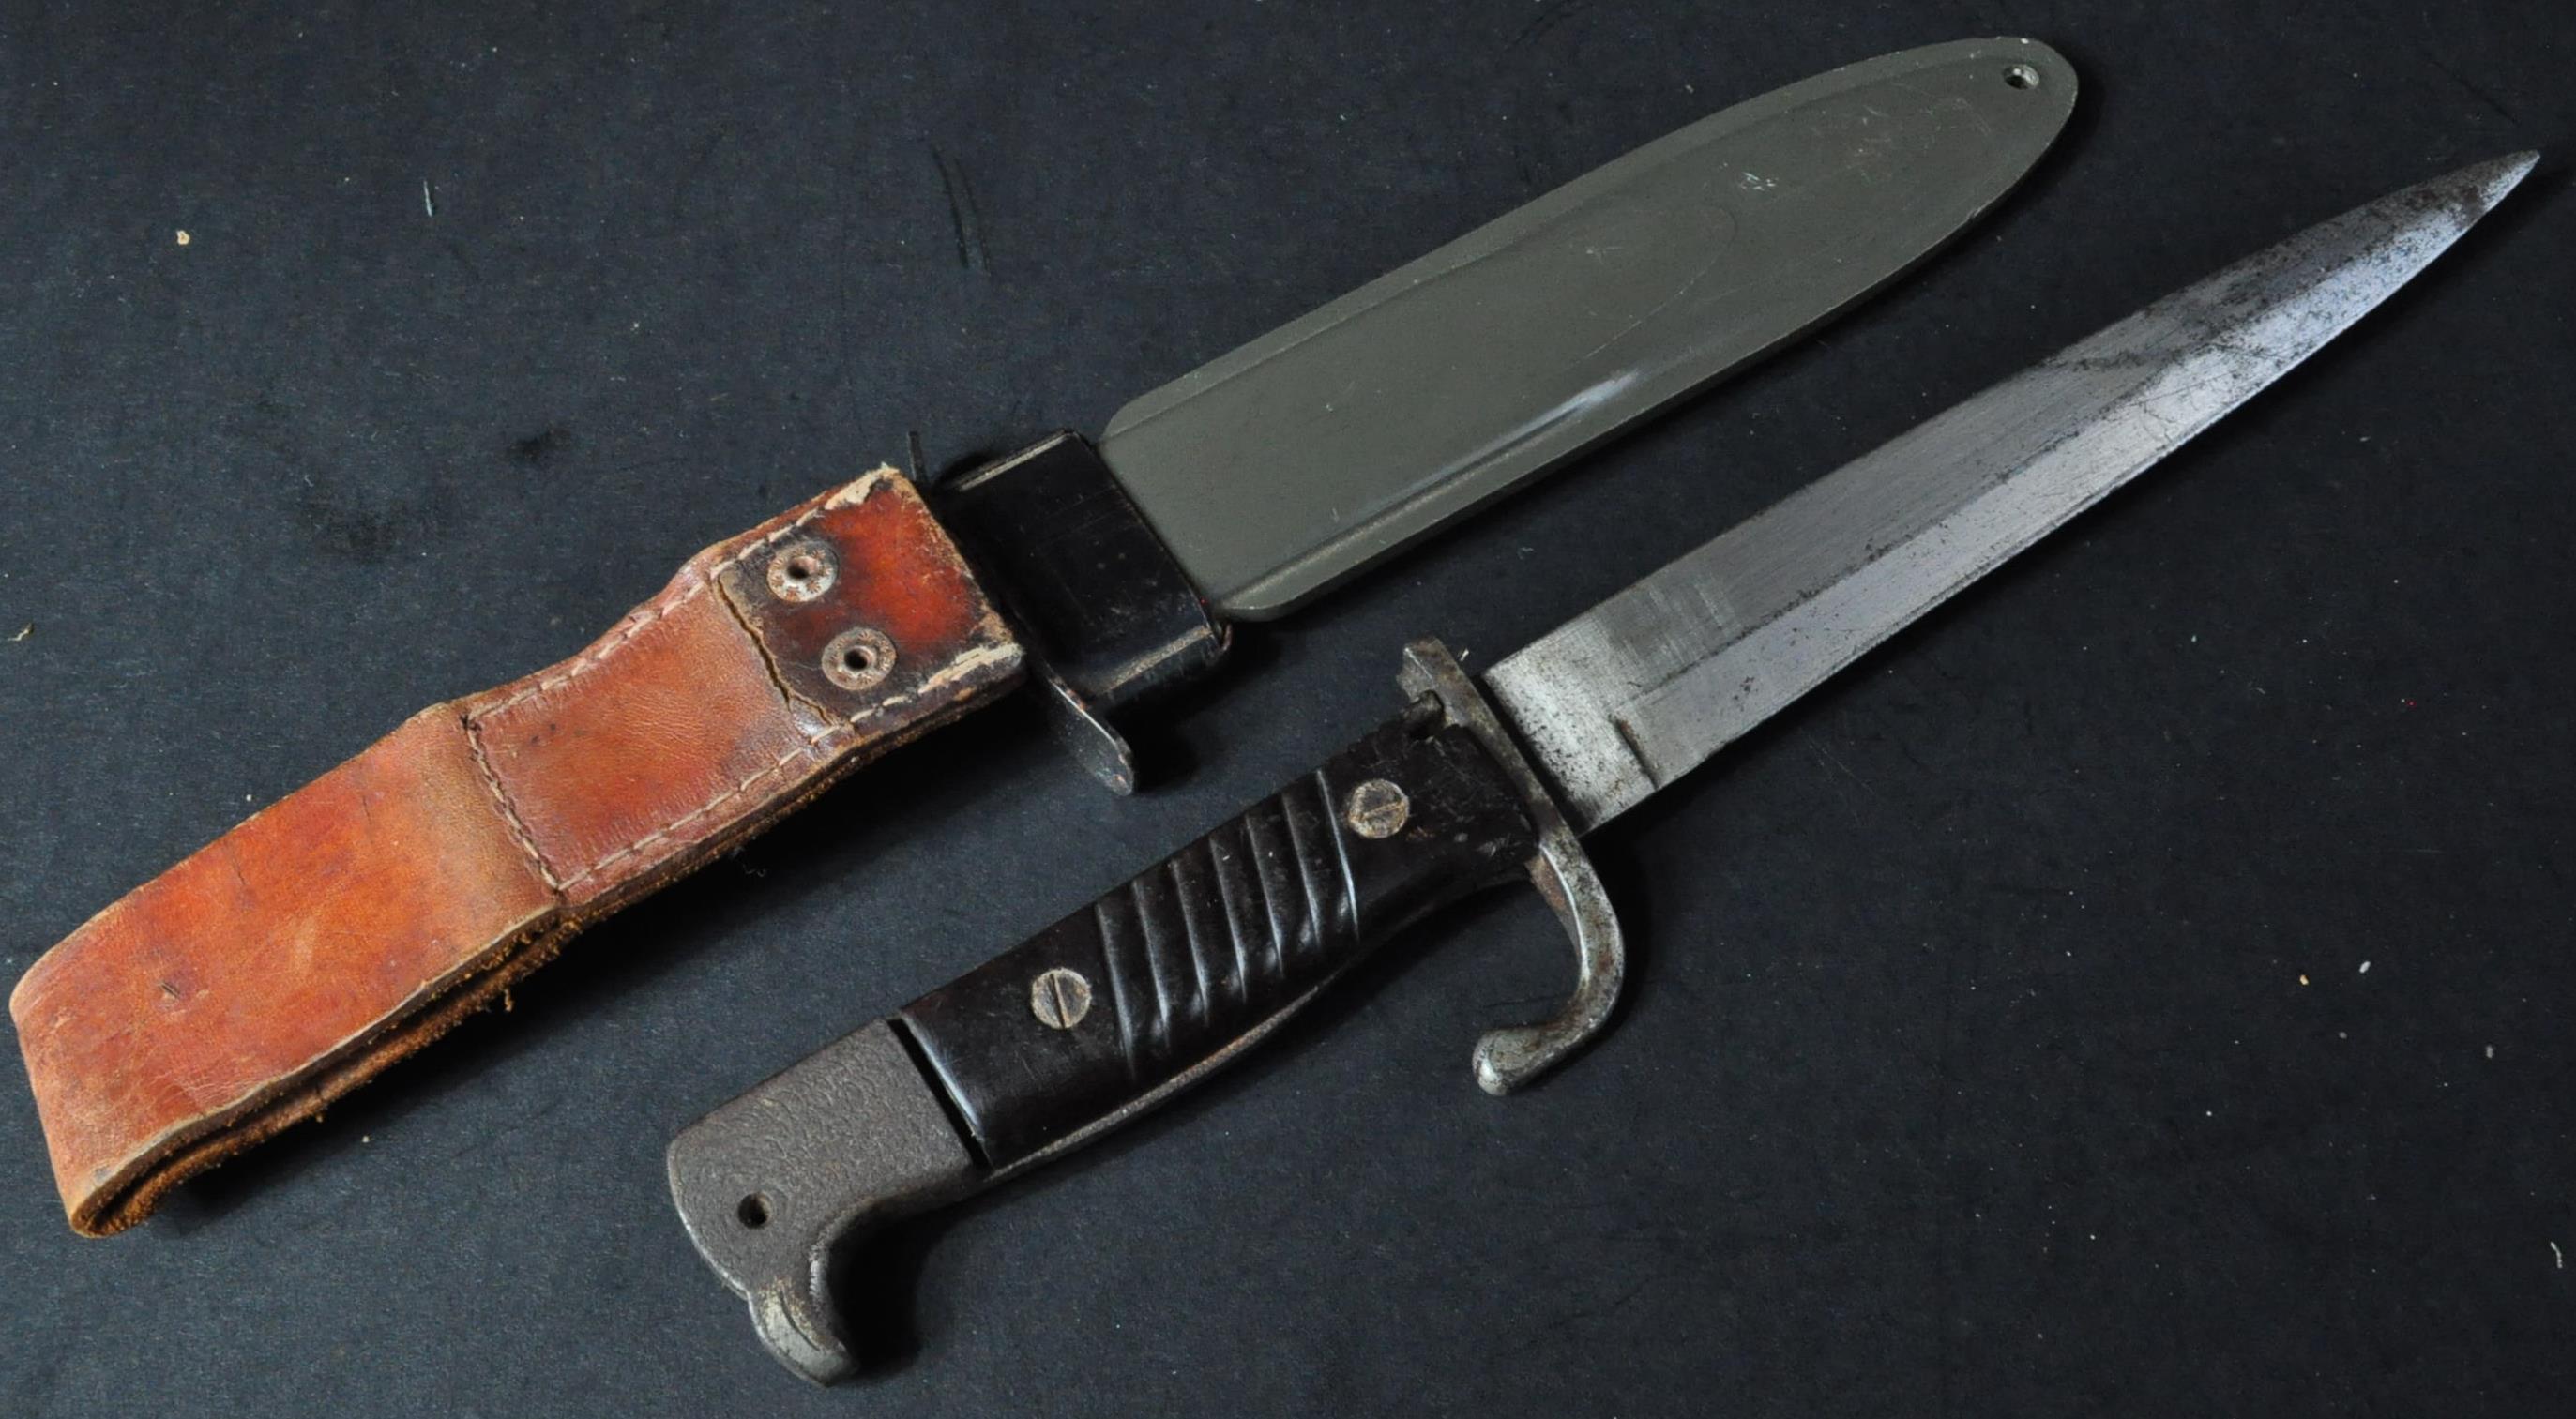 WWII SECOND WORLD WAR PERIOD FIGHTING KNIFE - Image 4 of 6